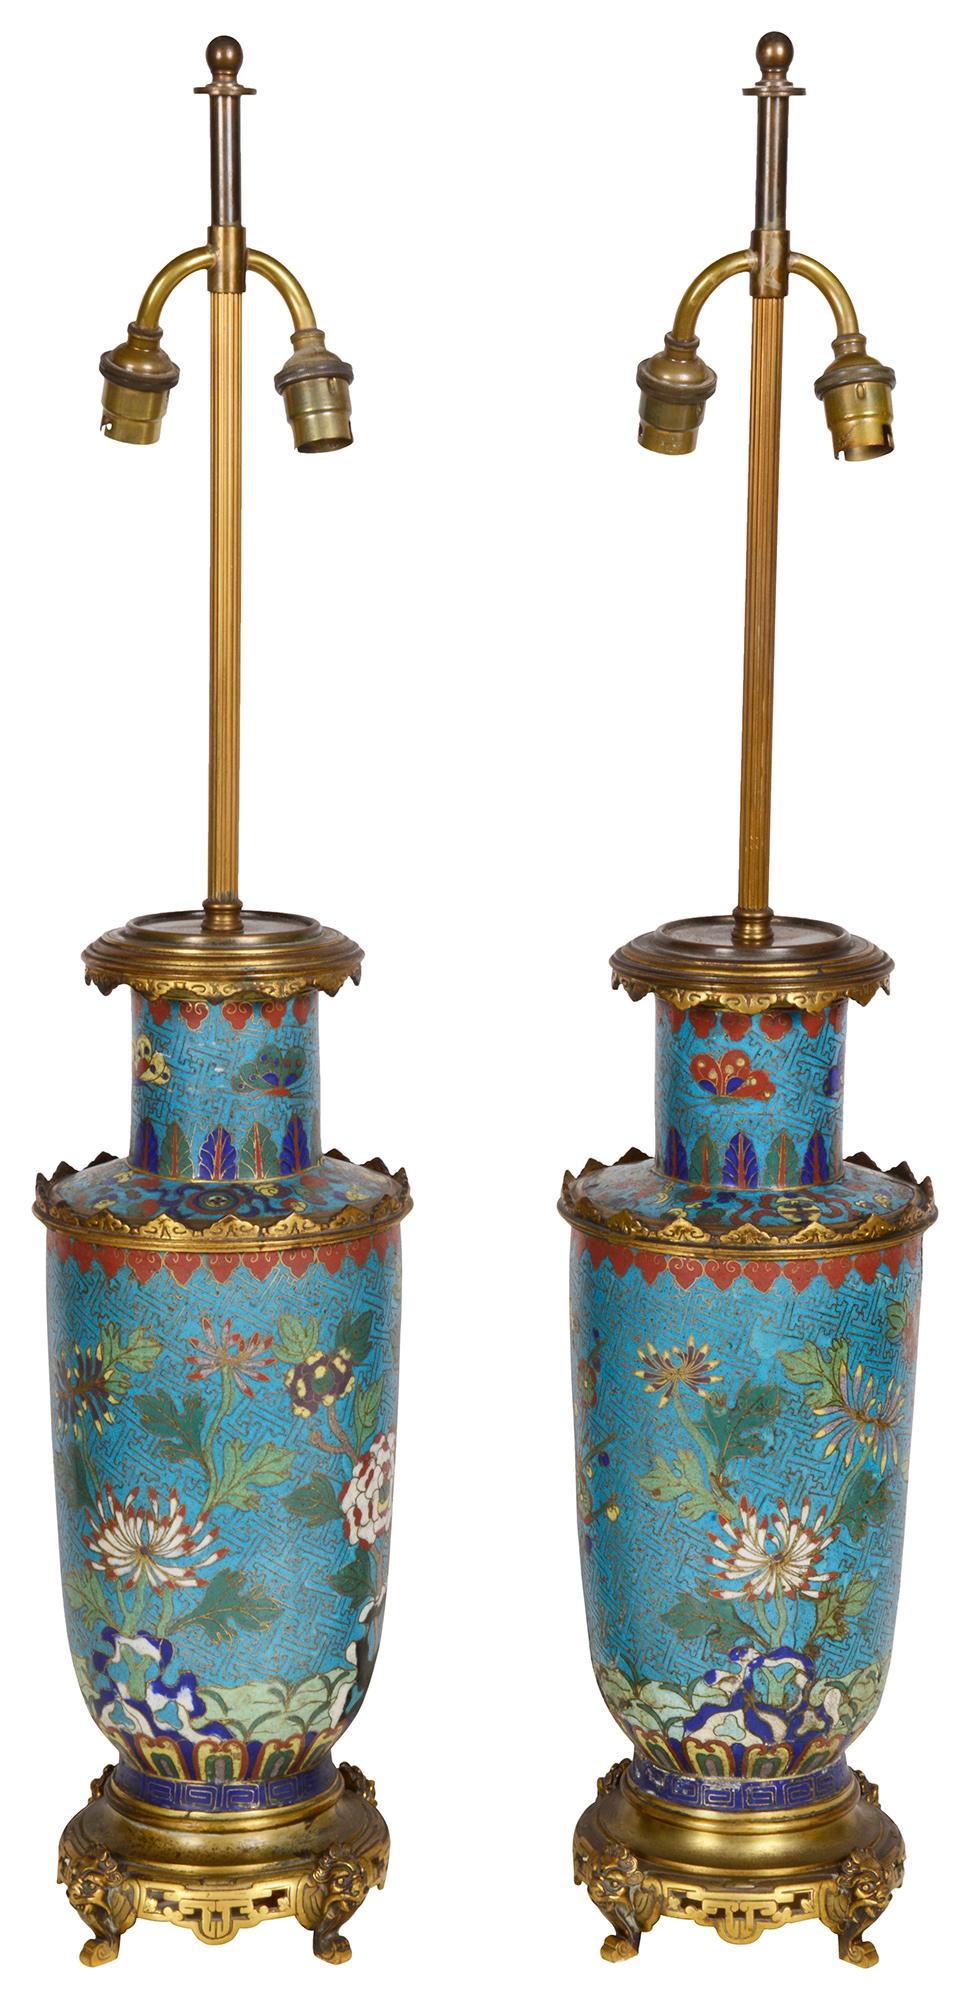 A very decorative pair of late 19th century French oriental style champleve enamel vases / lamps. Each having wonderful turquoise ground and exotic flowers, with gilded ormolu mounts.